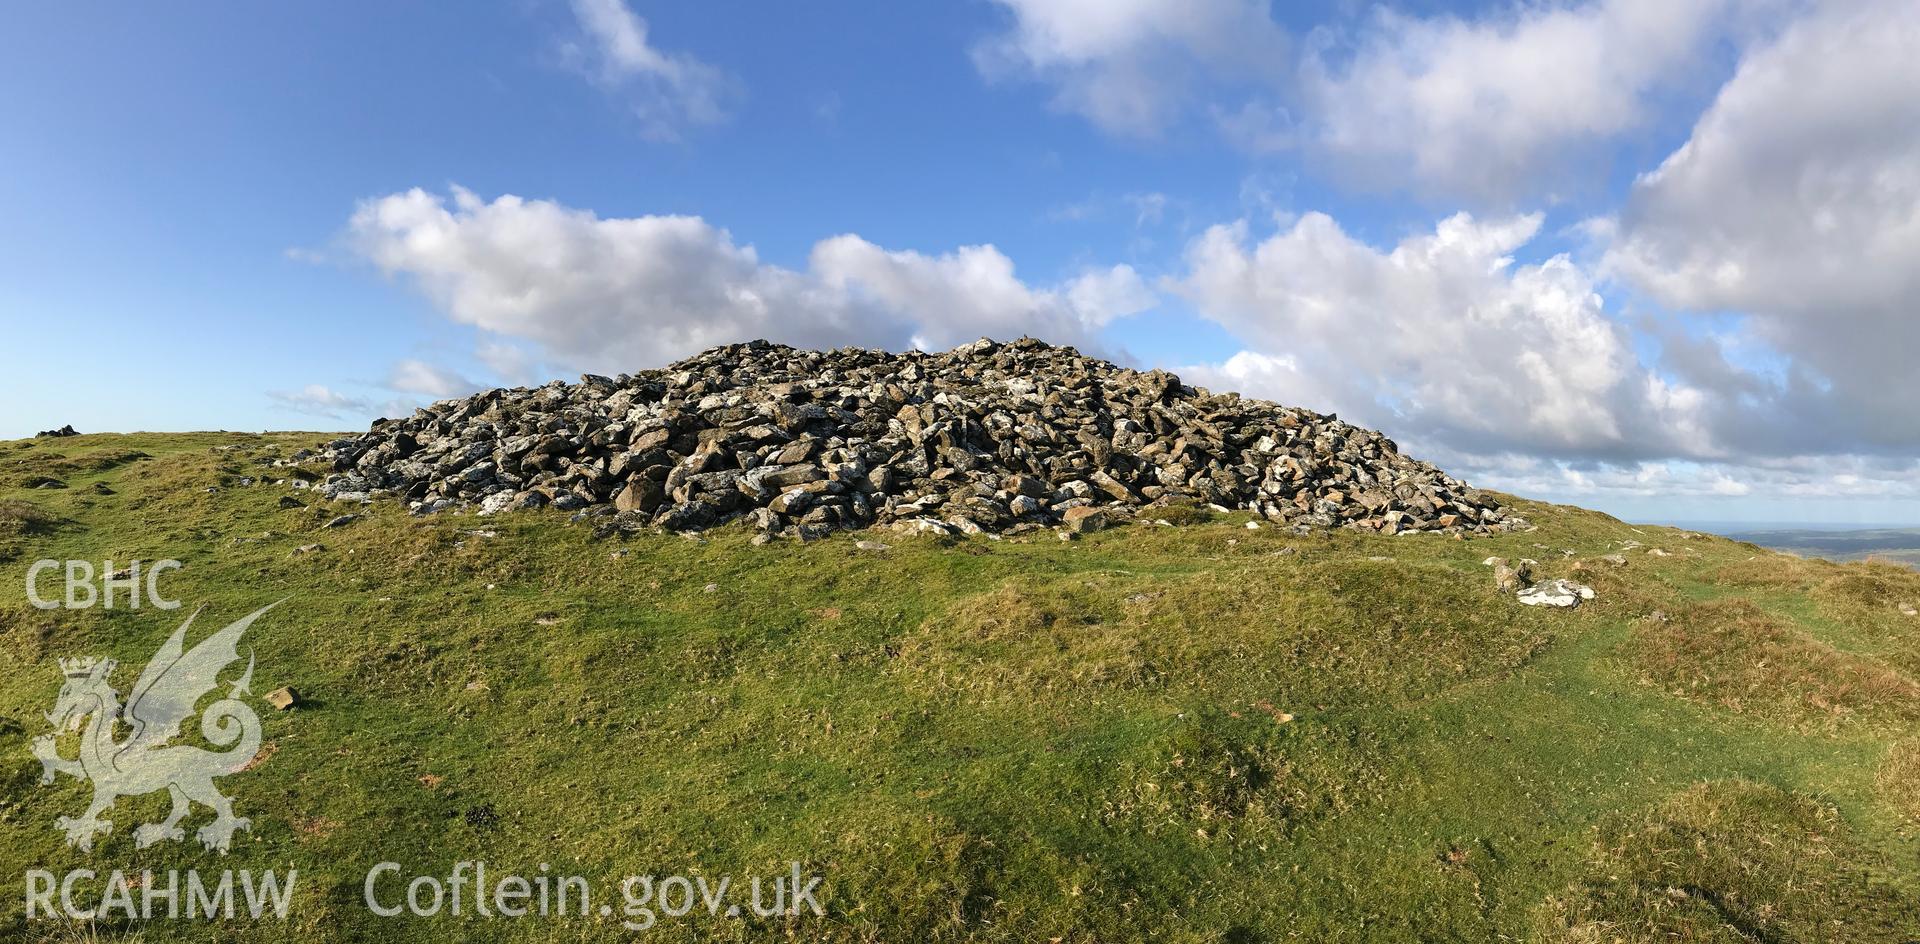 Digital colour photograph showing the east cairn at Moel Trigarn, Crymych, taken by Paul Davis on 22nd October 2019.